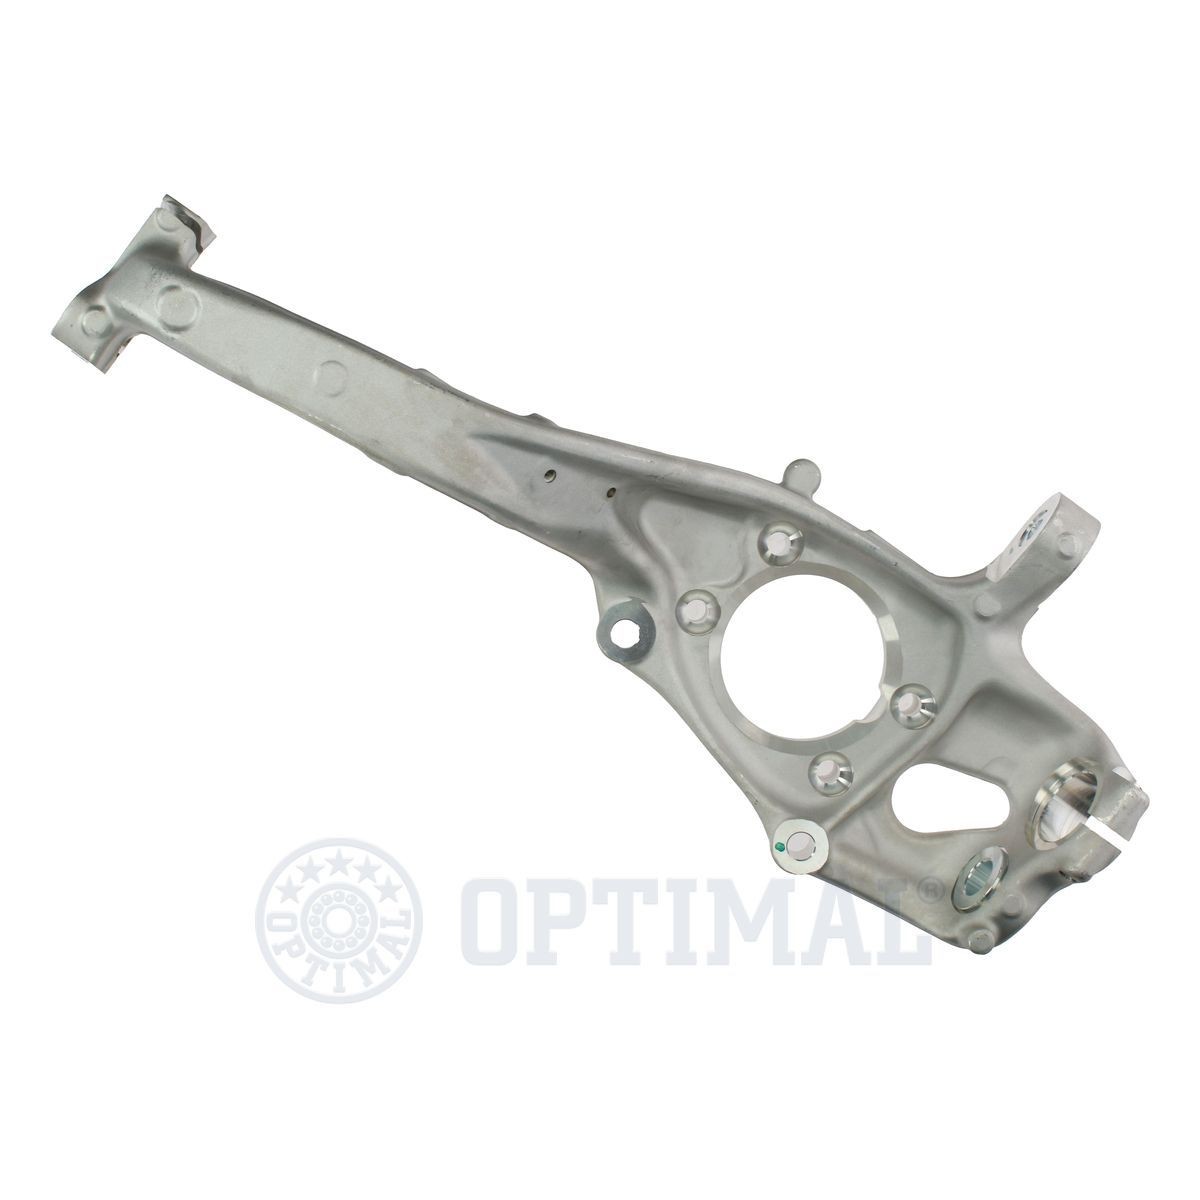 Original KN-100550-03-L OPTIMAL Steering knuckle experience and price